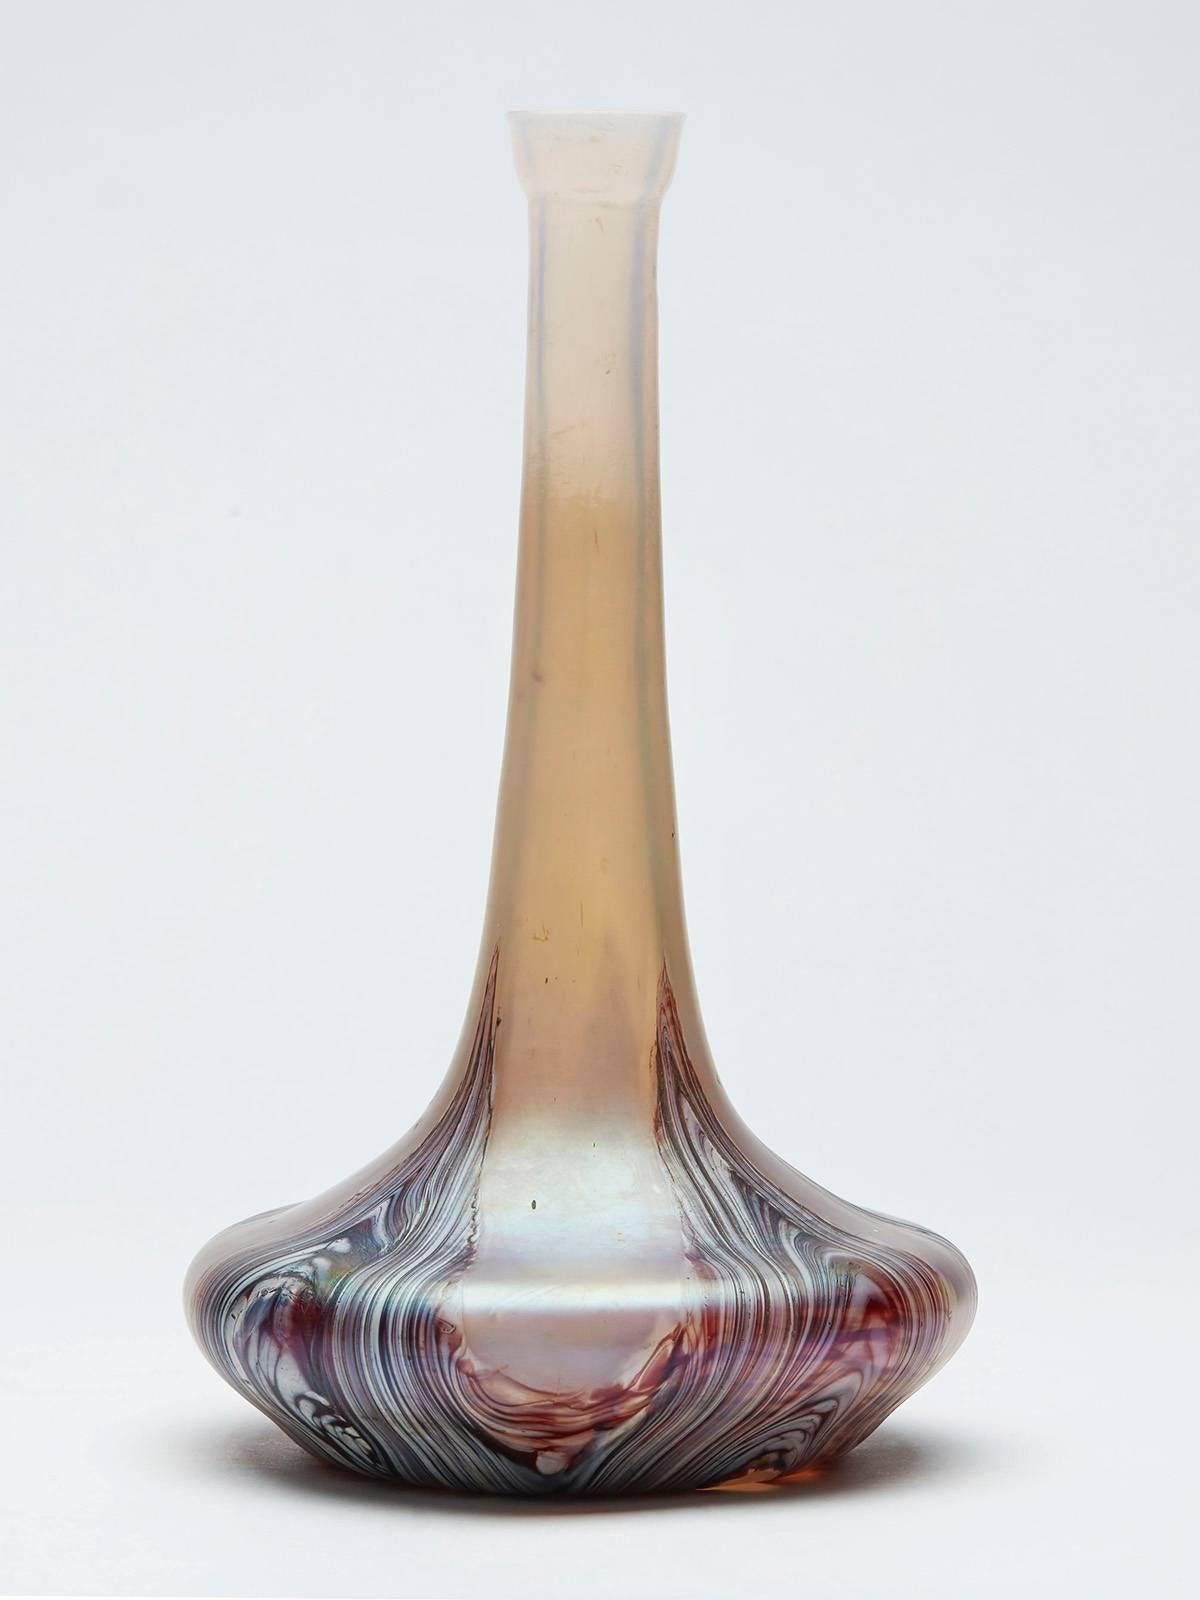 A Kralik art glass vase of bottle shape with marbled designs within an opalescent glass body with a squat wide rounded base and tall slender neck with a cup shaped top. The vase is decorated with red brown and white swirled designs gathered together